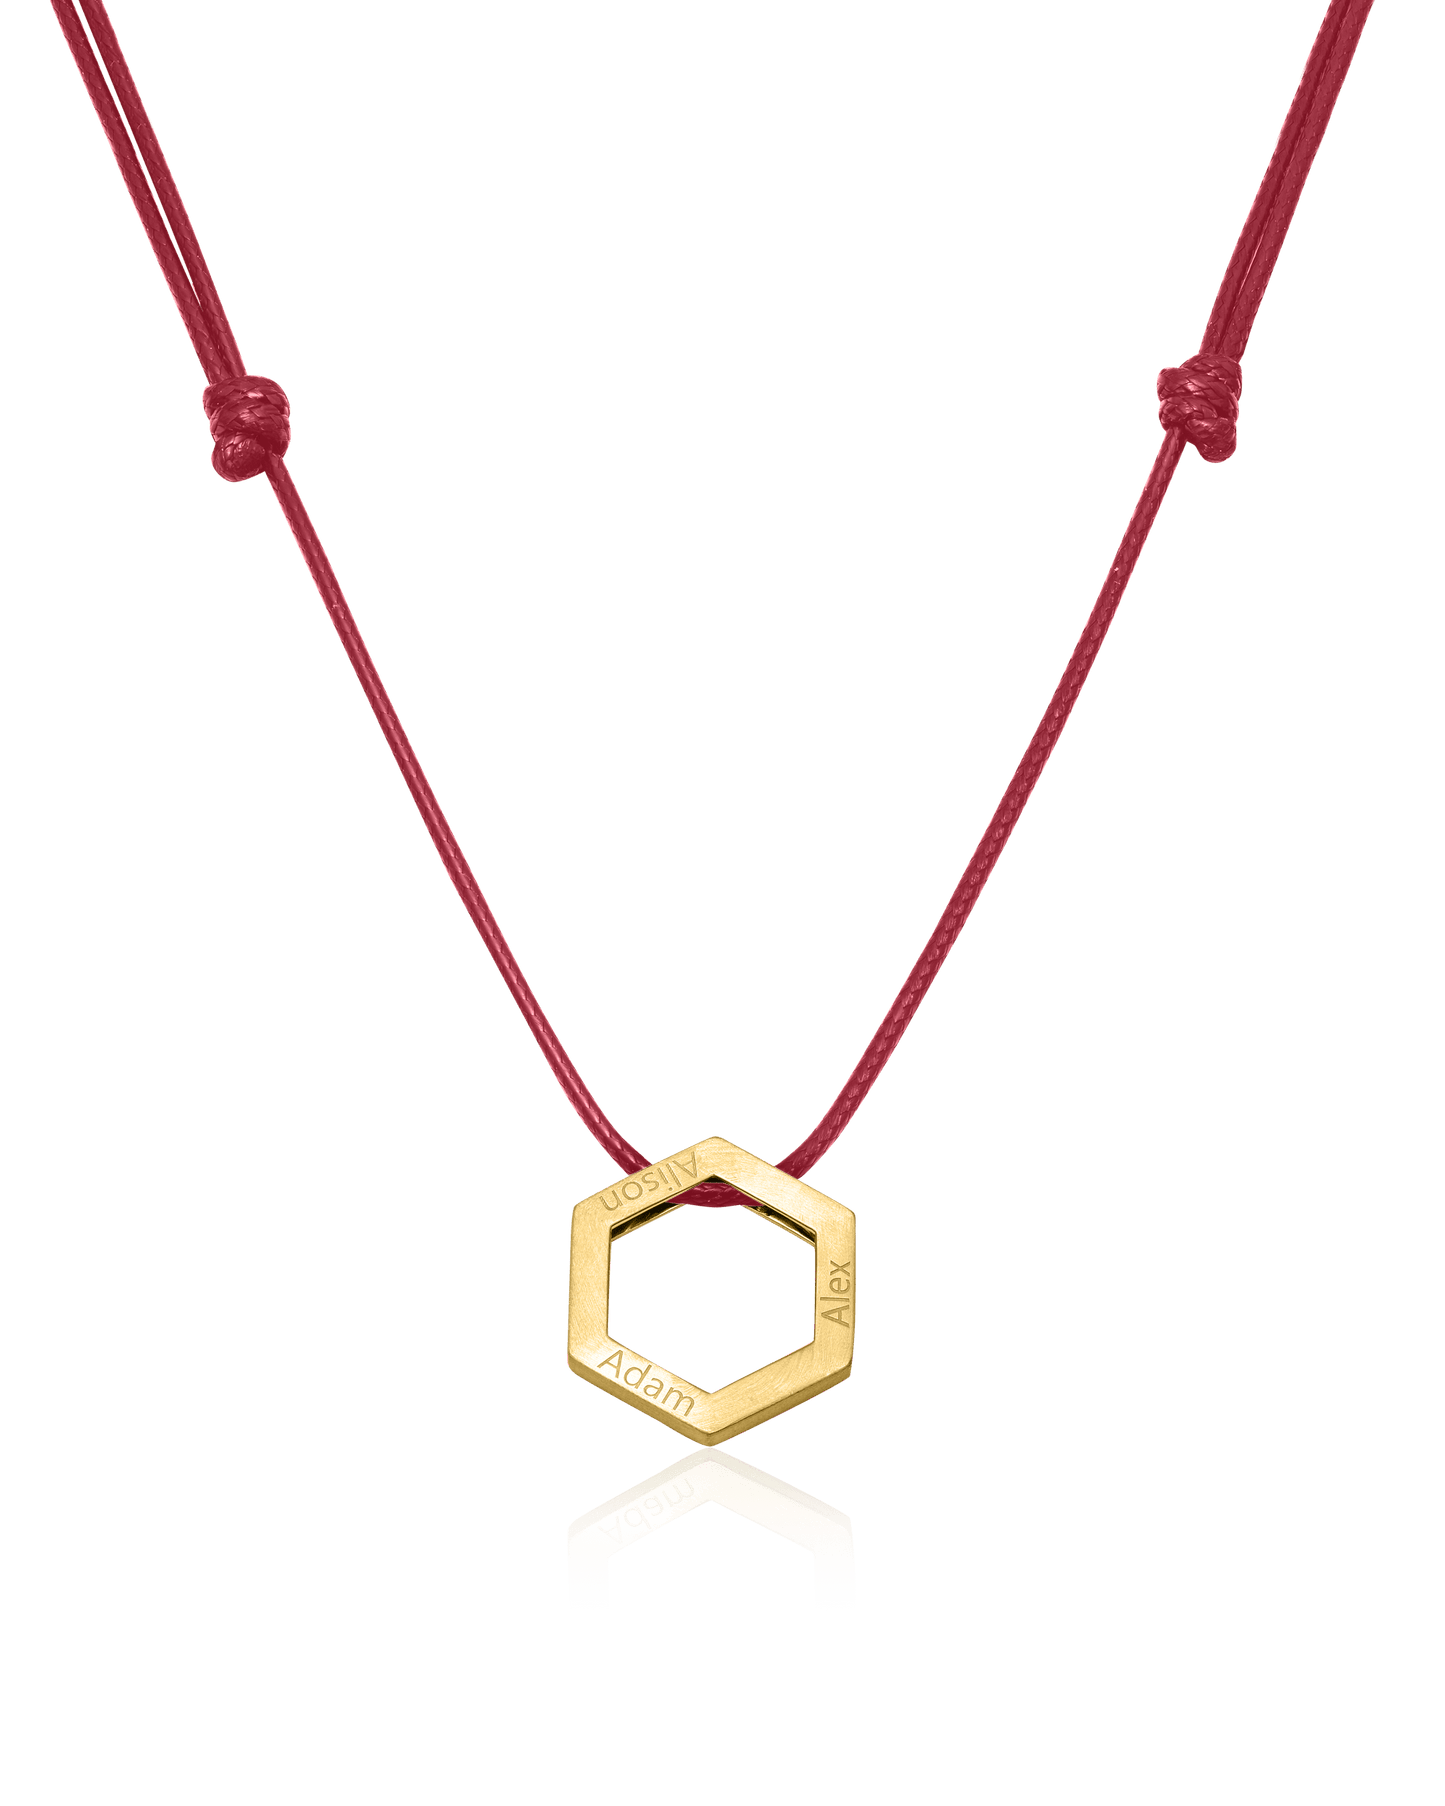 Honeycomb Necklace - 18K Gold Vermeil Necklaces magal-dev Red 1 Name Adjustable Cord Chain 20"-24"